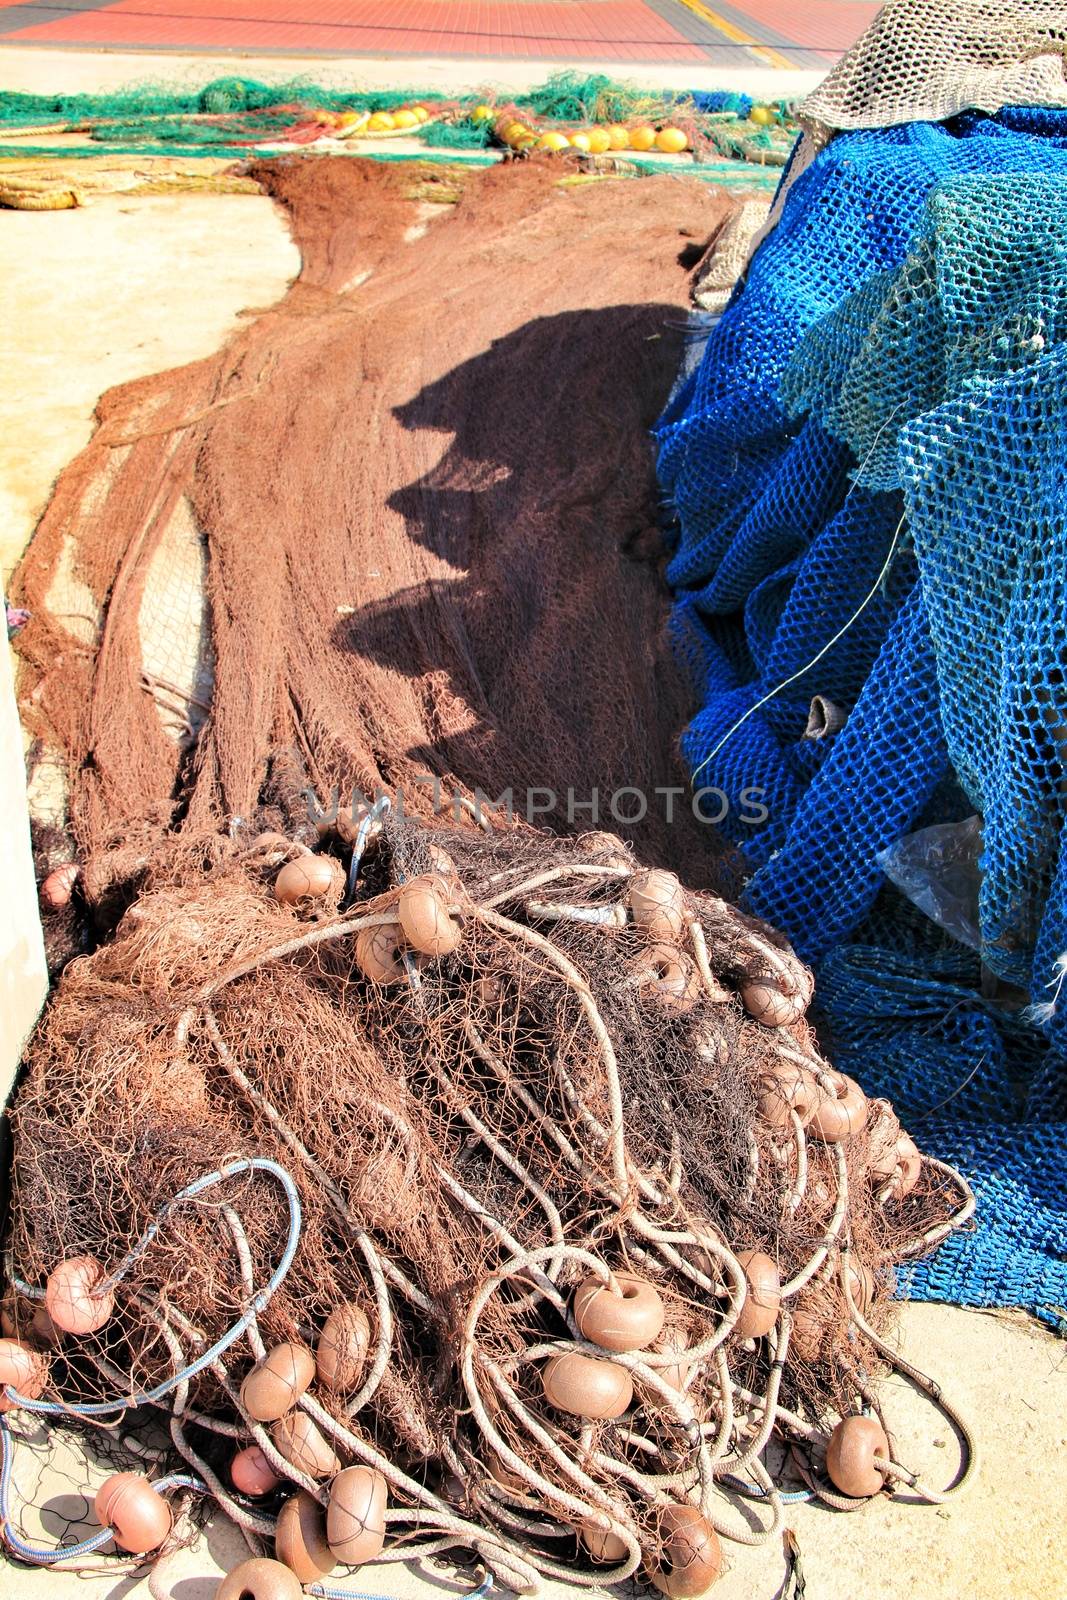 Fishing nets background in the port of Santa Pola, Alicante